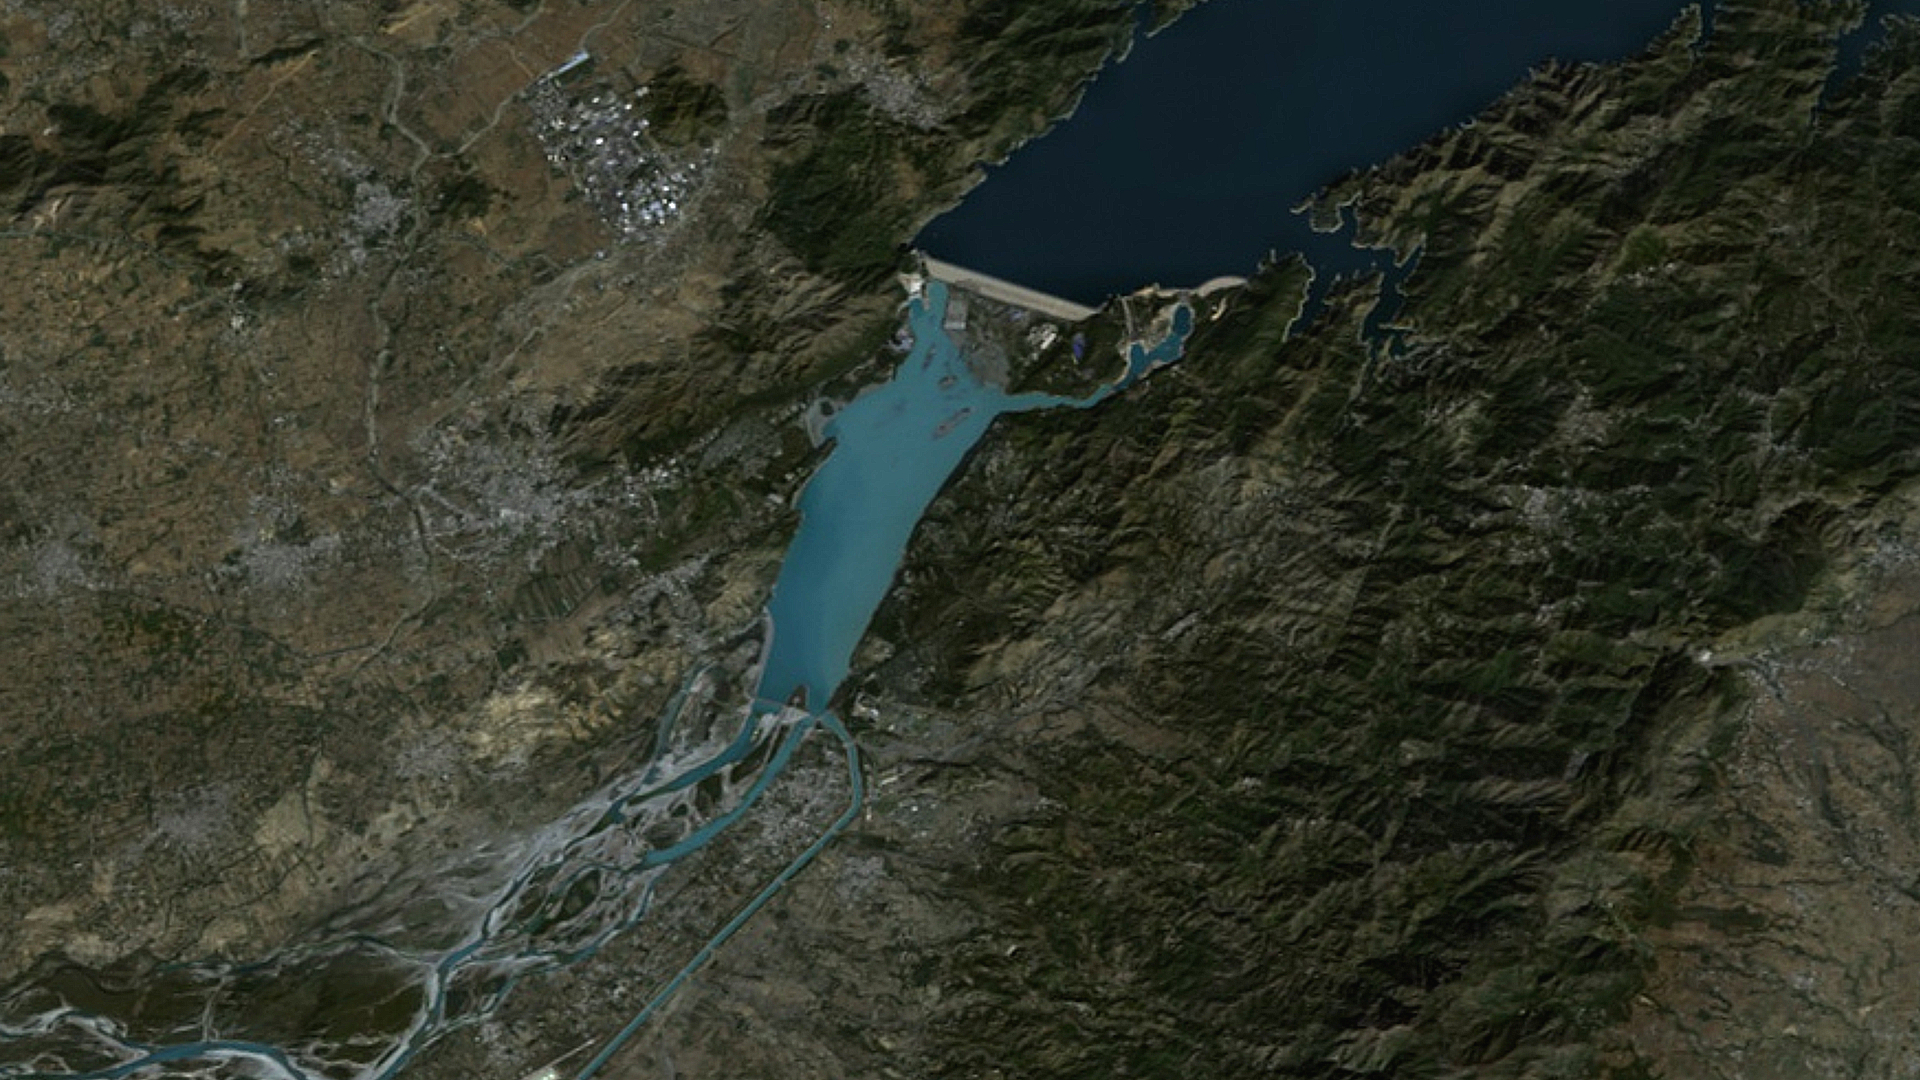 The Tarbela dam on the Indus river